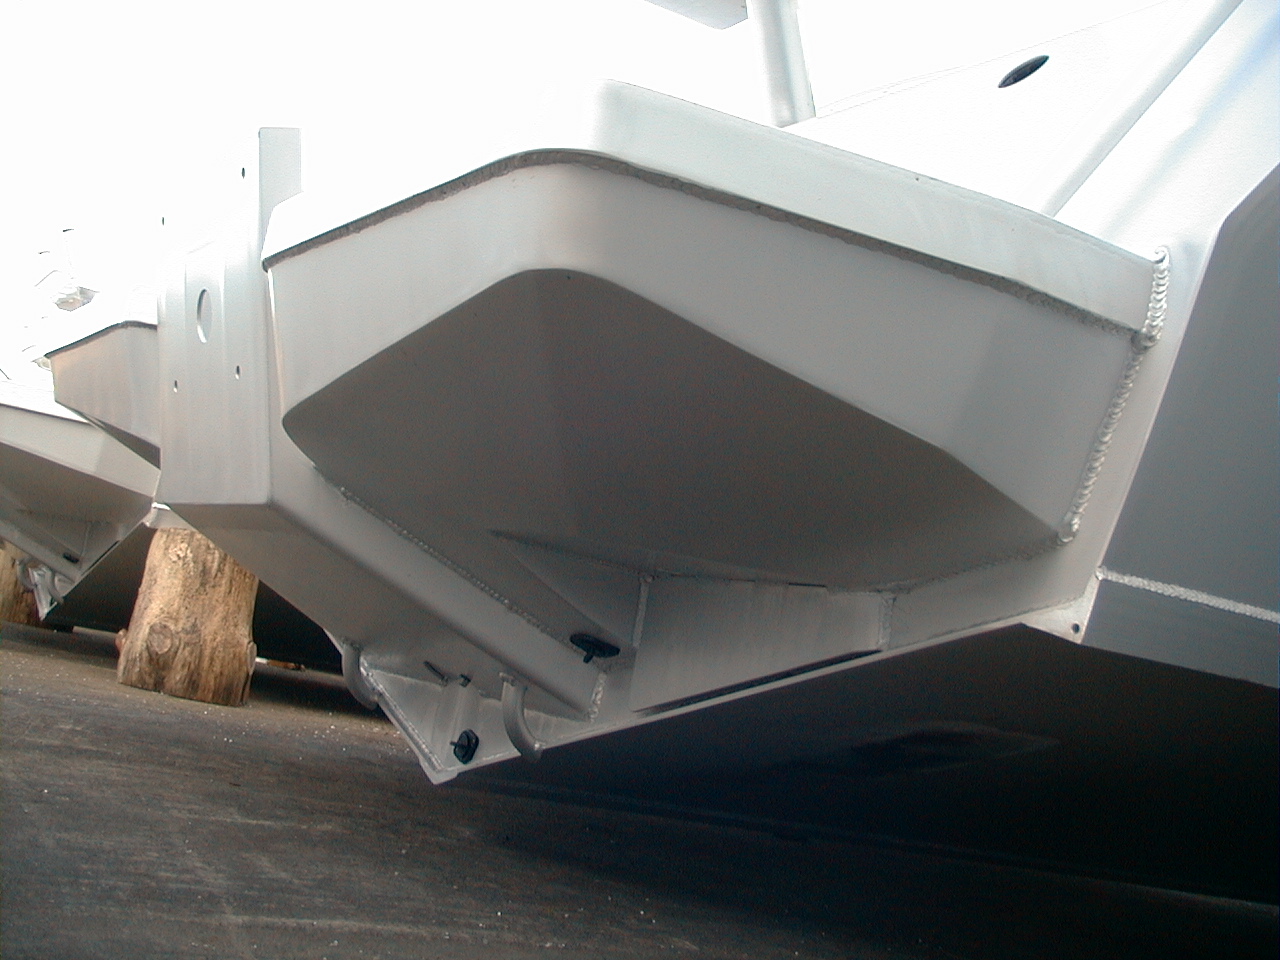 AMF Boats - Alloy Boat Builders: AMF 580 Vee Berth Cabin ...